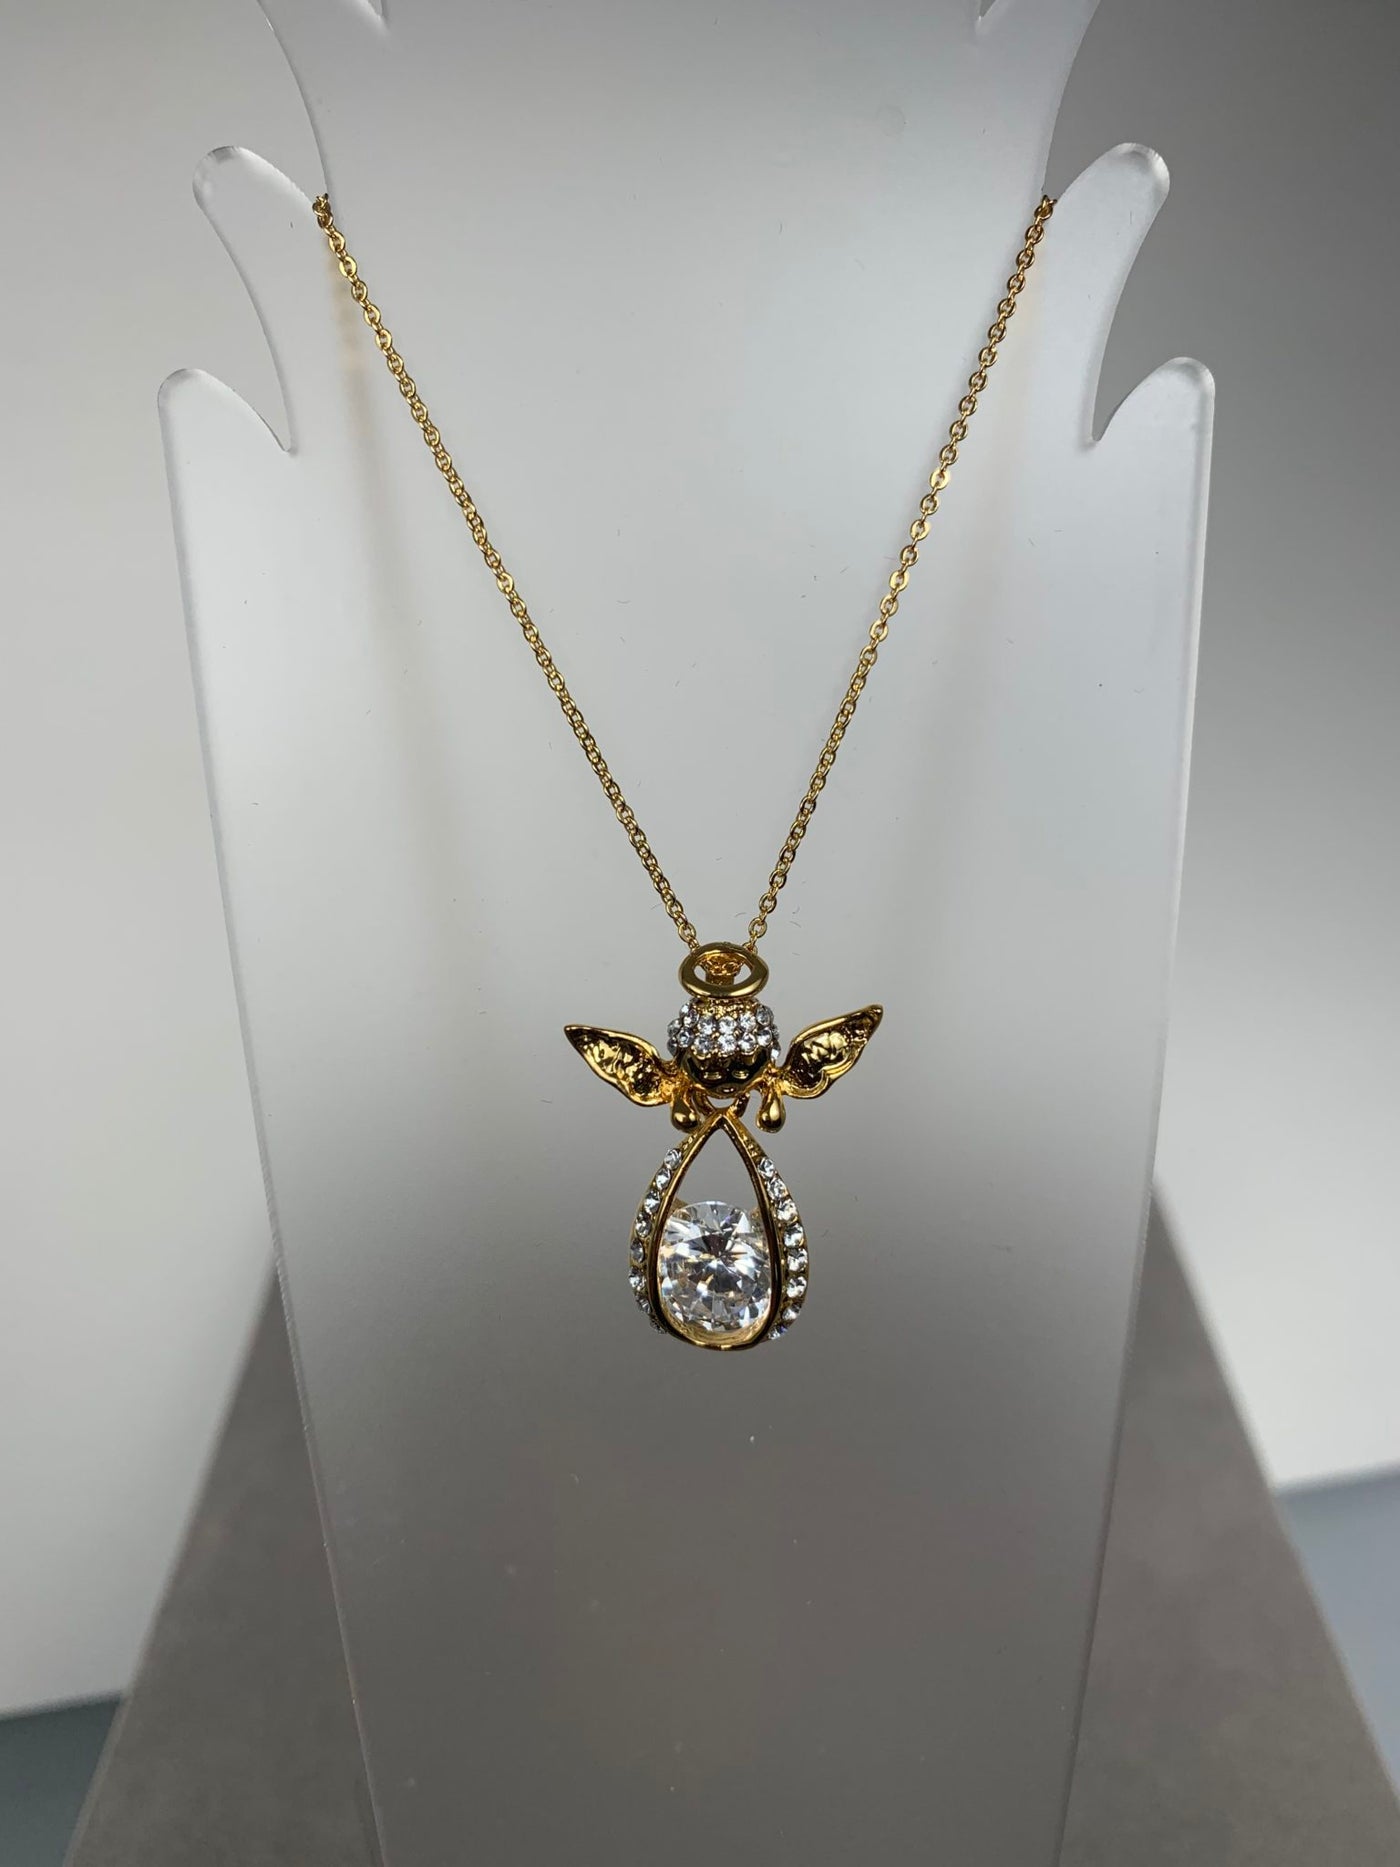 Crystal Angel Pendant Necklace in Yellow Gold Tone